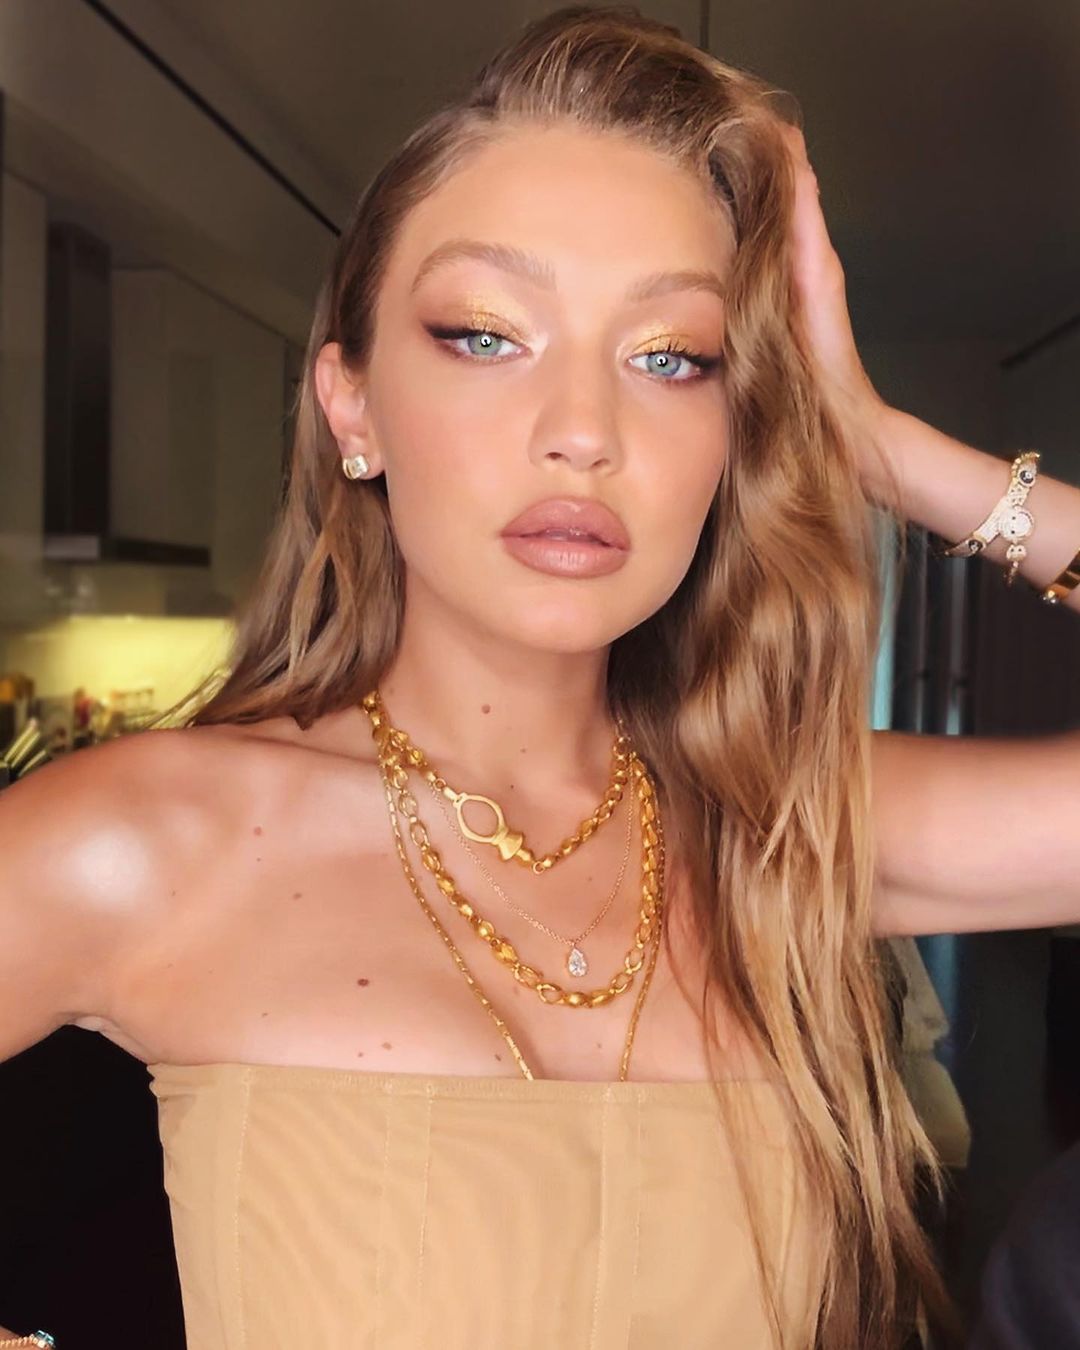 Photo n°2 : Sports Illustrated Swimsuit Set Instagram on Fire With a Throwback Look at Gigi Hadid!